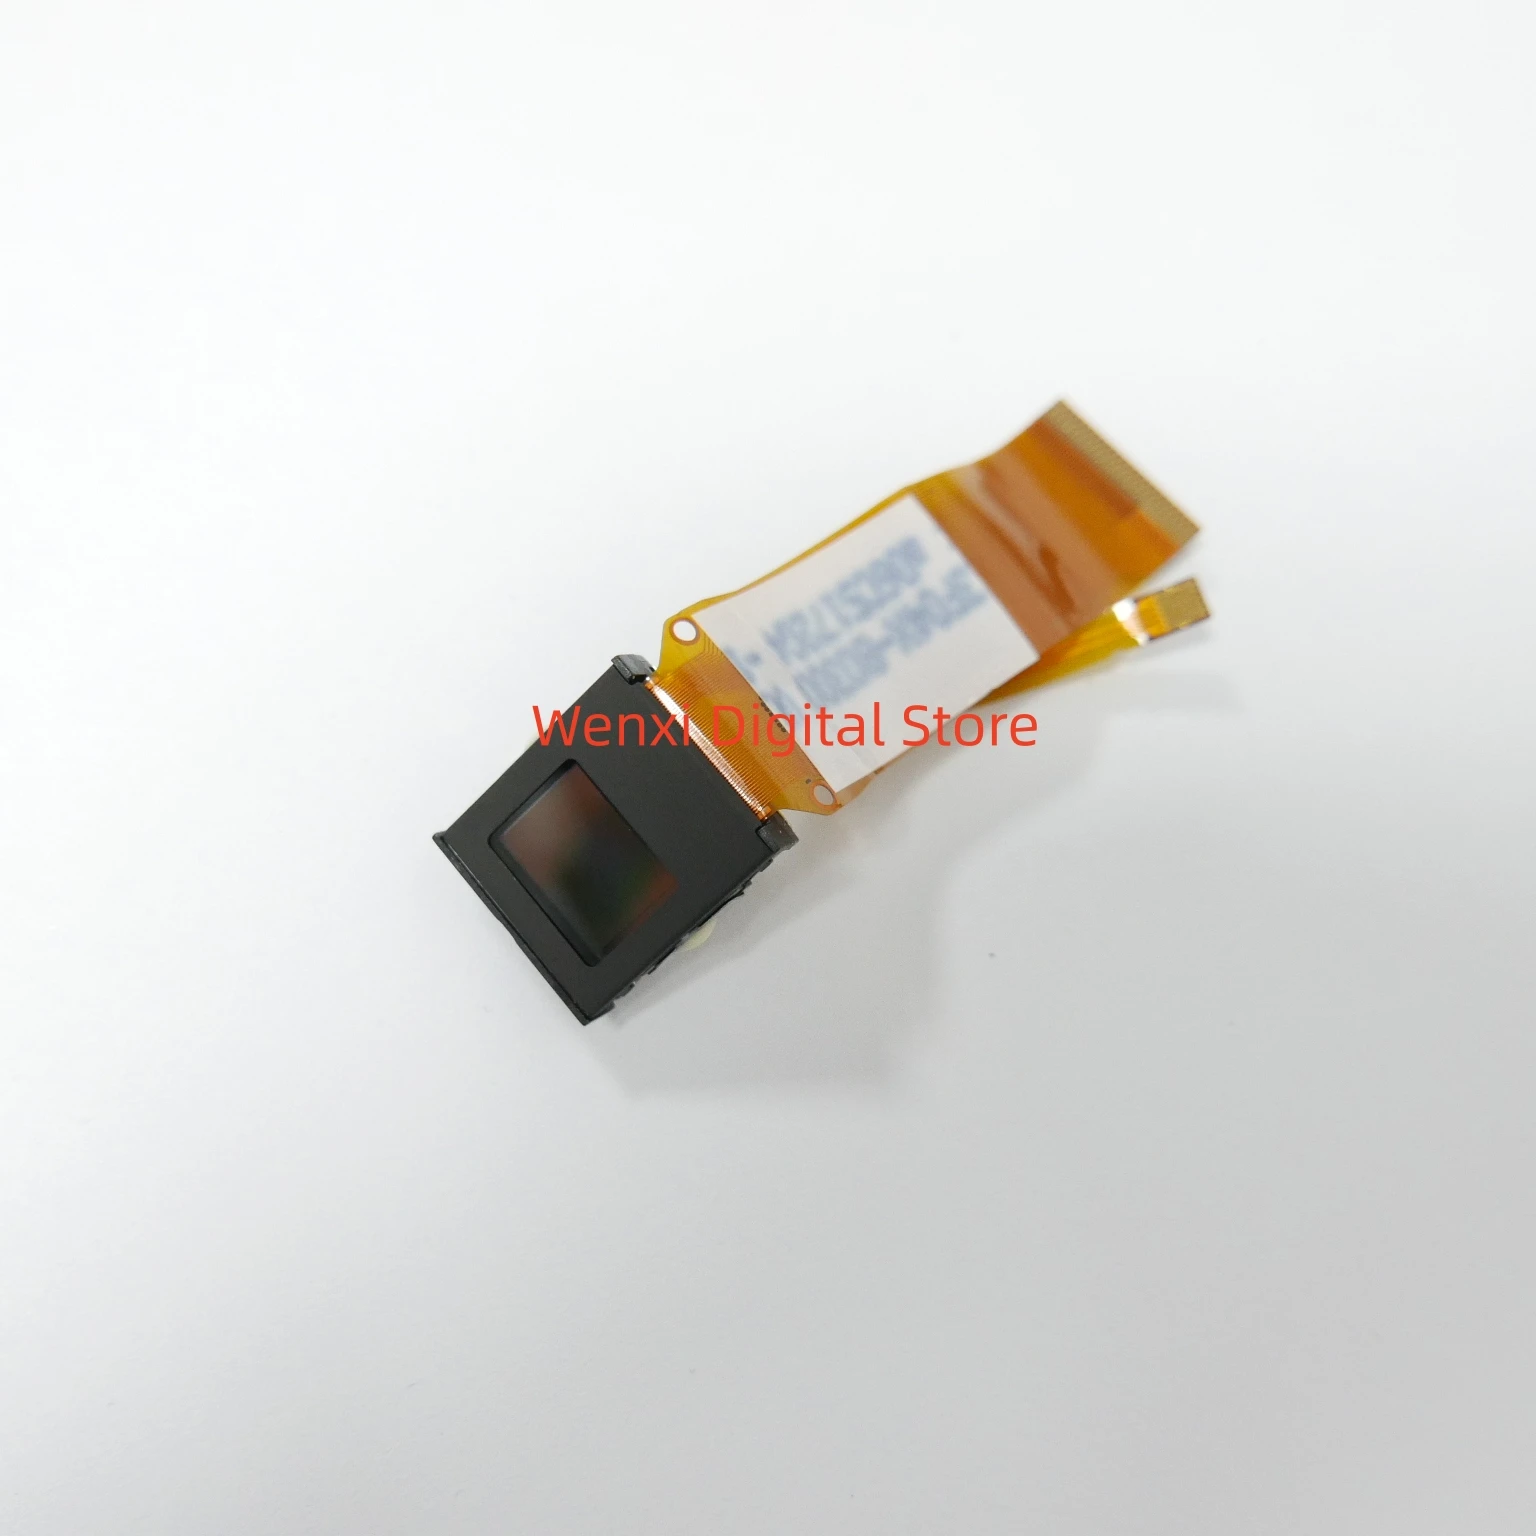 

For Fuji X100S Viewfinder View Finder Eyepiece LCD Display Screen Assy For Fujifilm X-100S Camera Repair Part